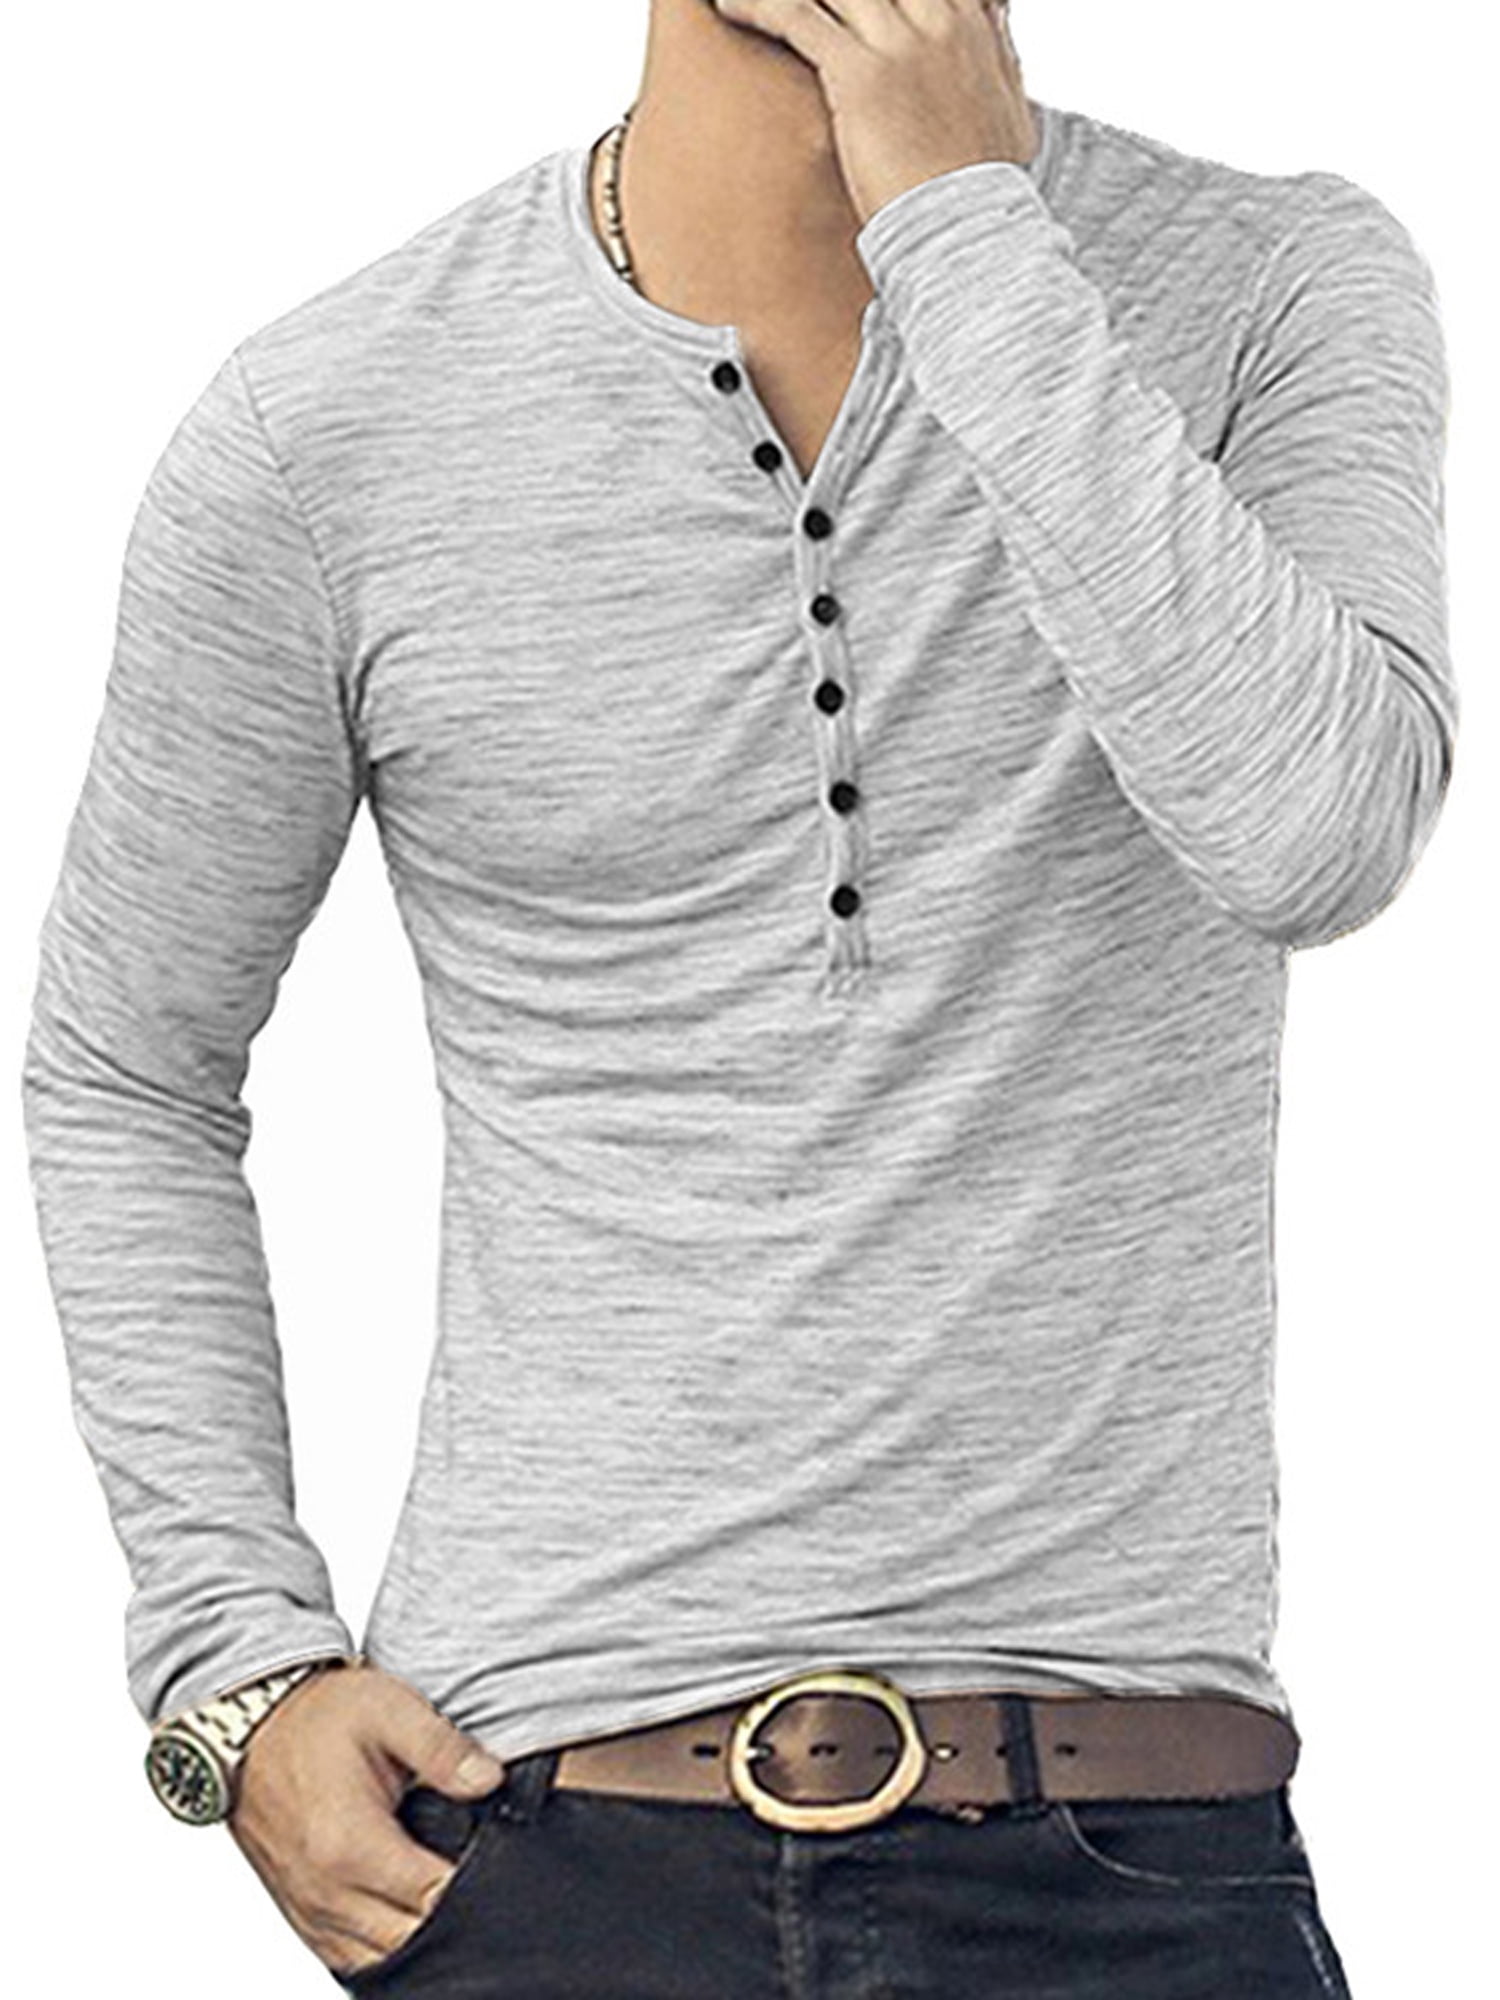 Men's Soft Slim Fit Henley T-shirt Tops Long Sleeve Casual Button Down Shirts